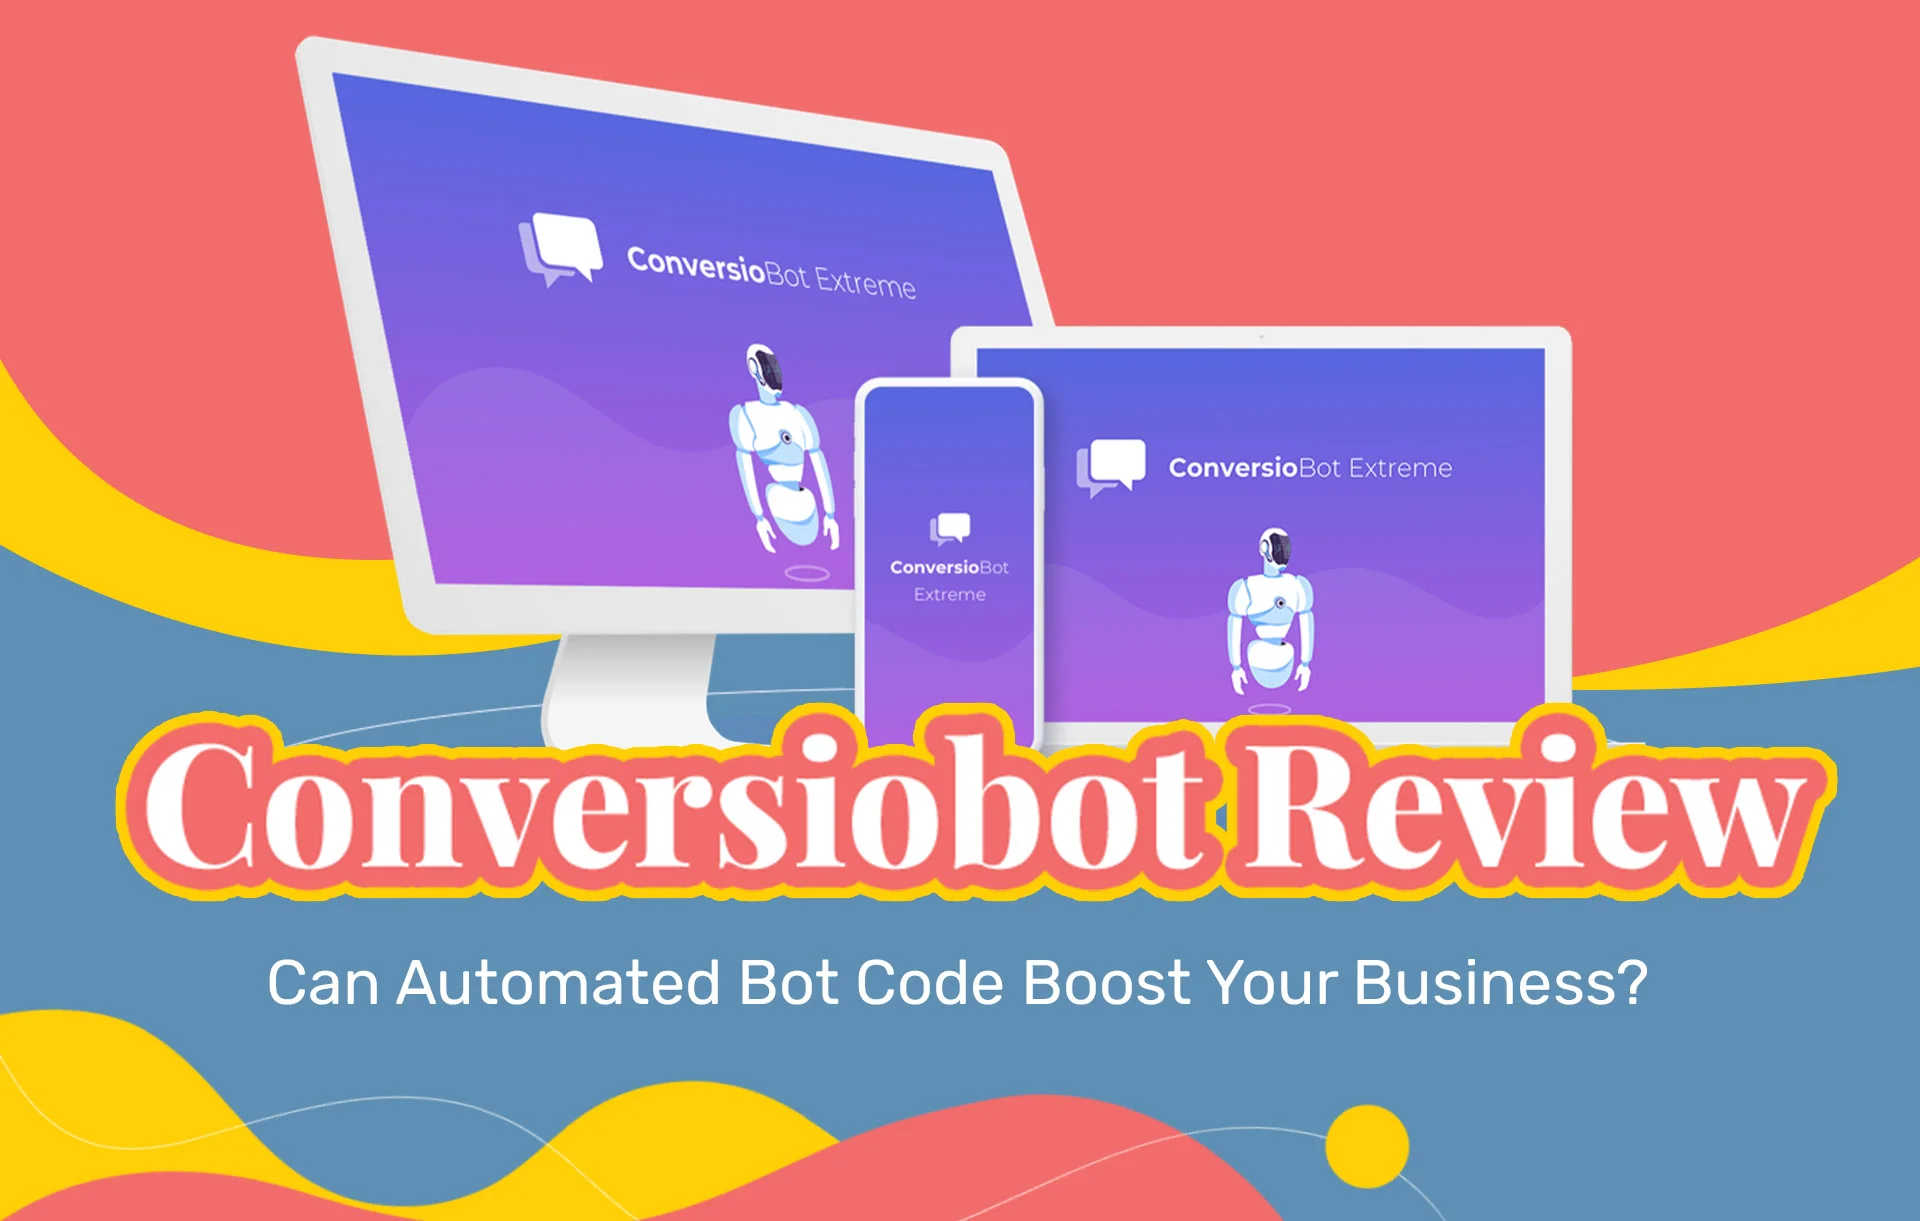 Conversiobot Review (2023 Update): Can Automated Bot Code Boost Your Business?